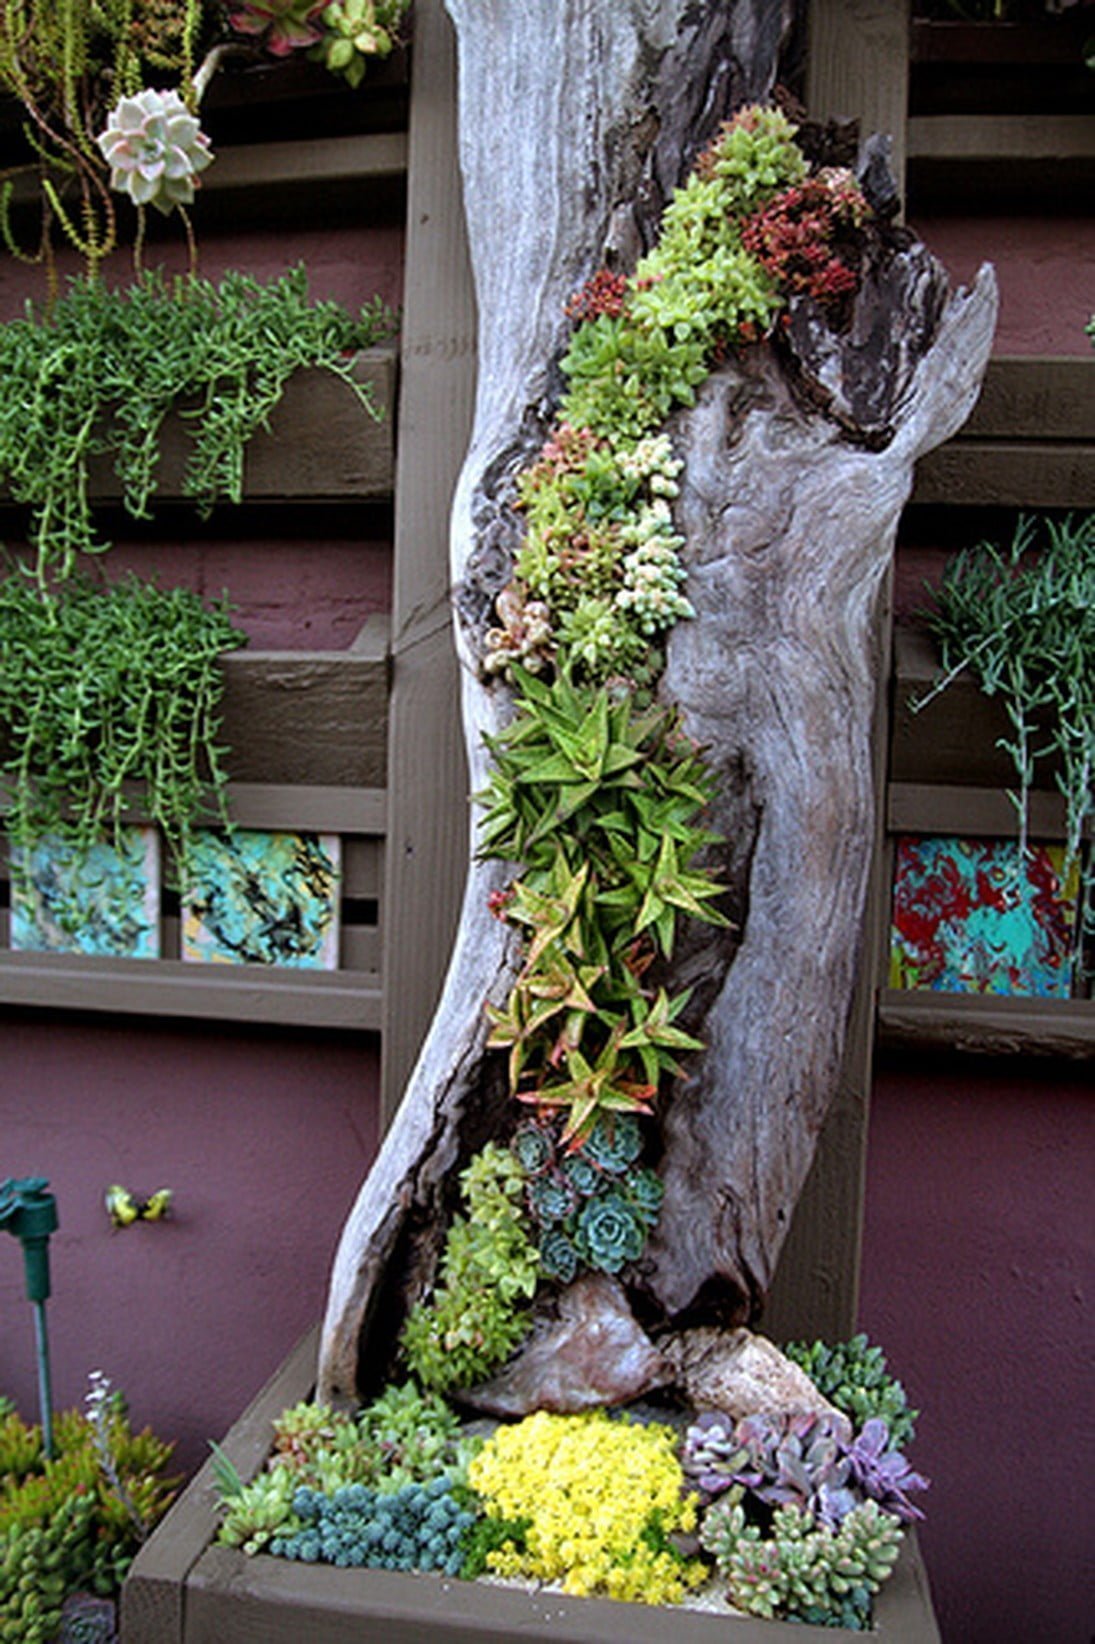 The 50 Best Vertical Garden Ideas and Designs for 2016